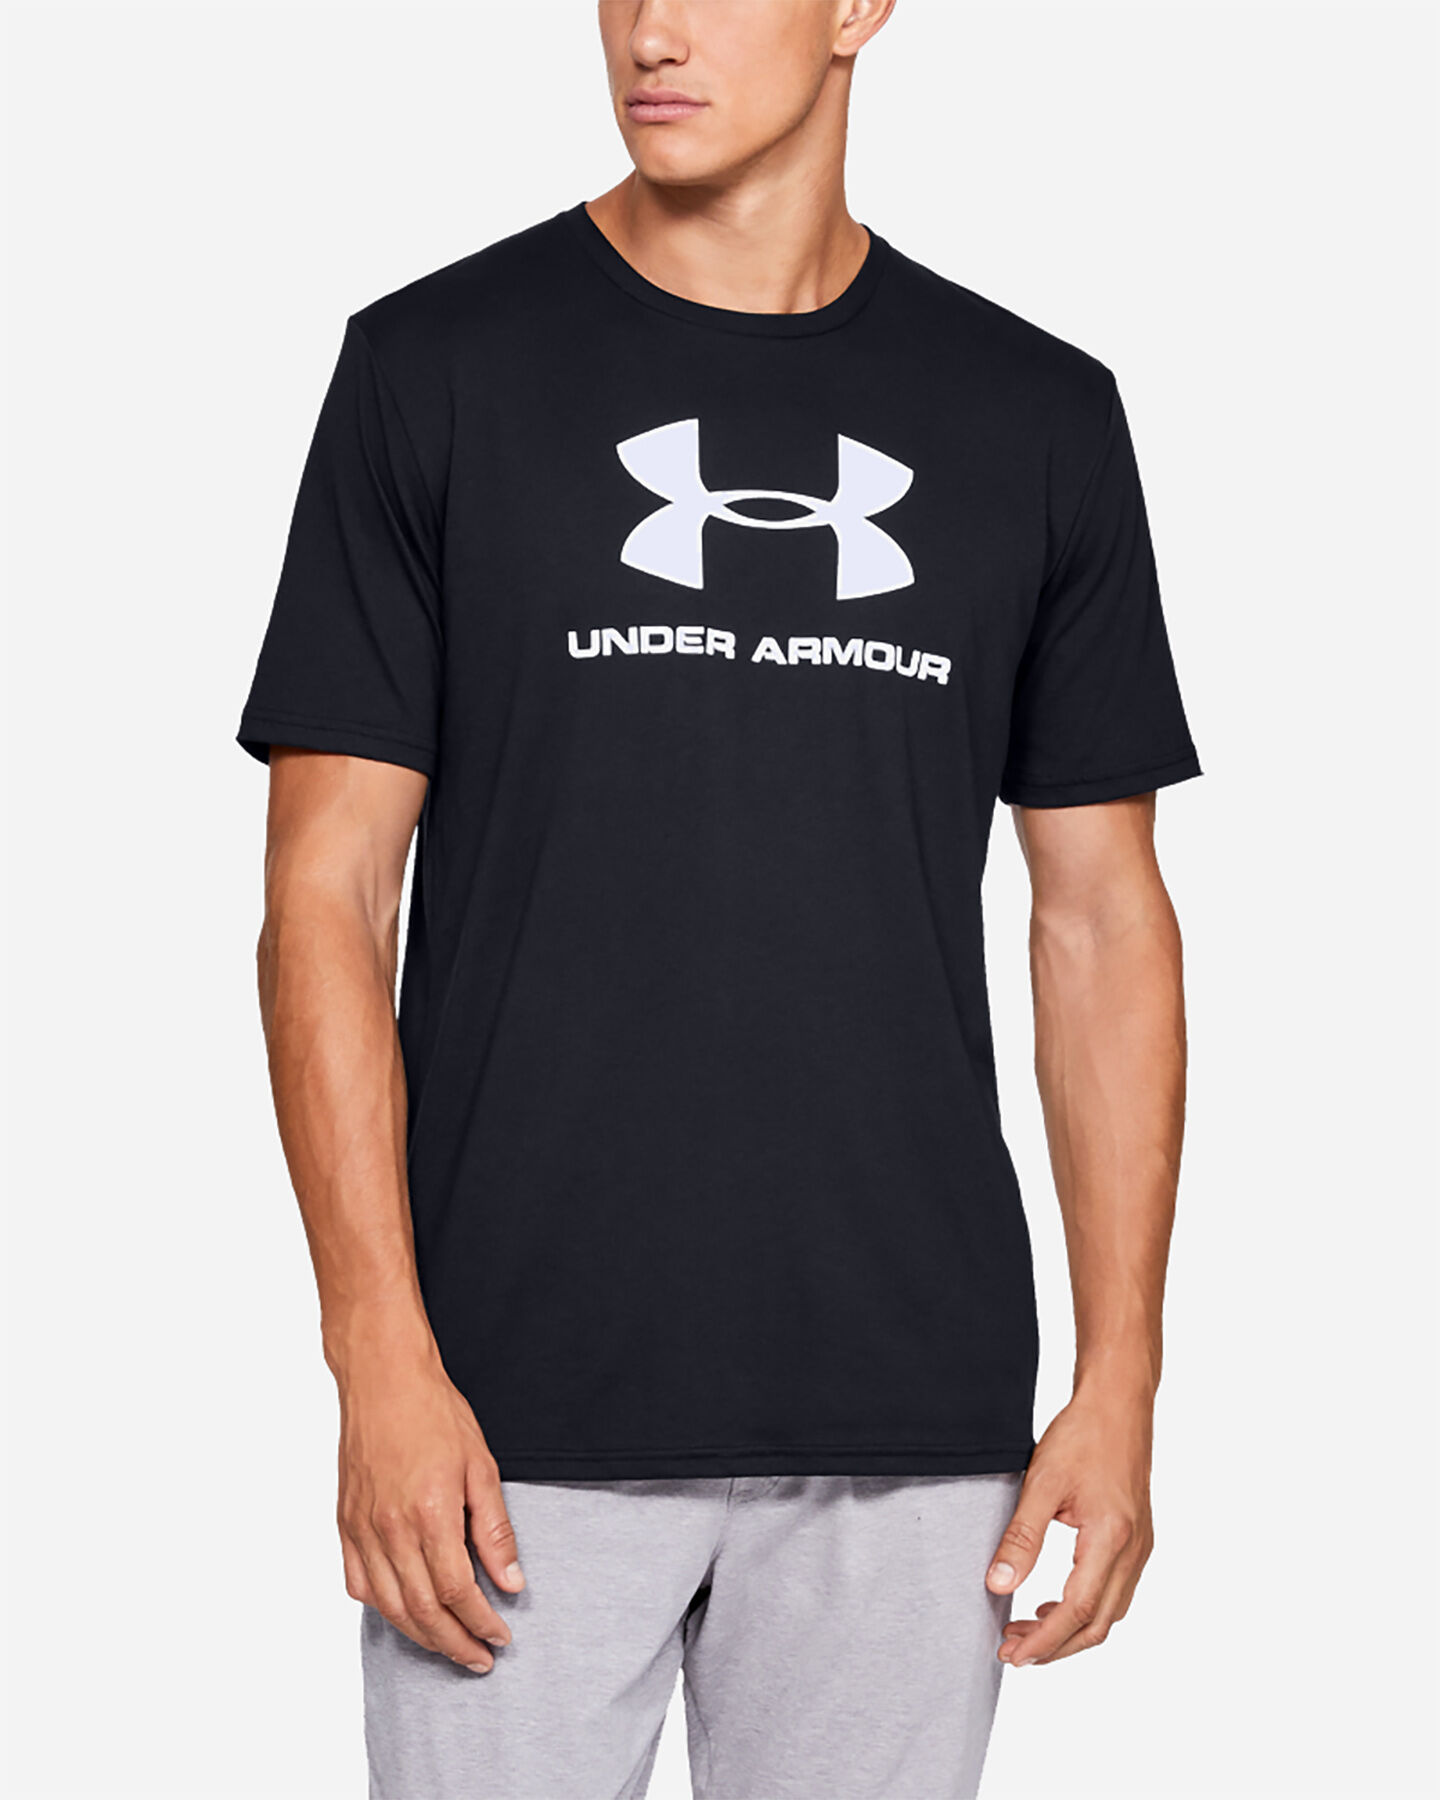  T-Shirt UNDER ARMOUR BIG LOGO M S5035486|0001|XS scatto 2